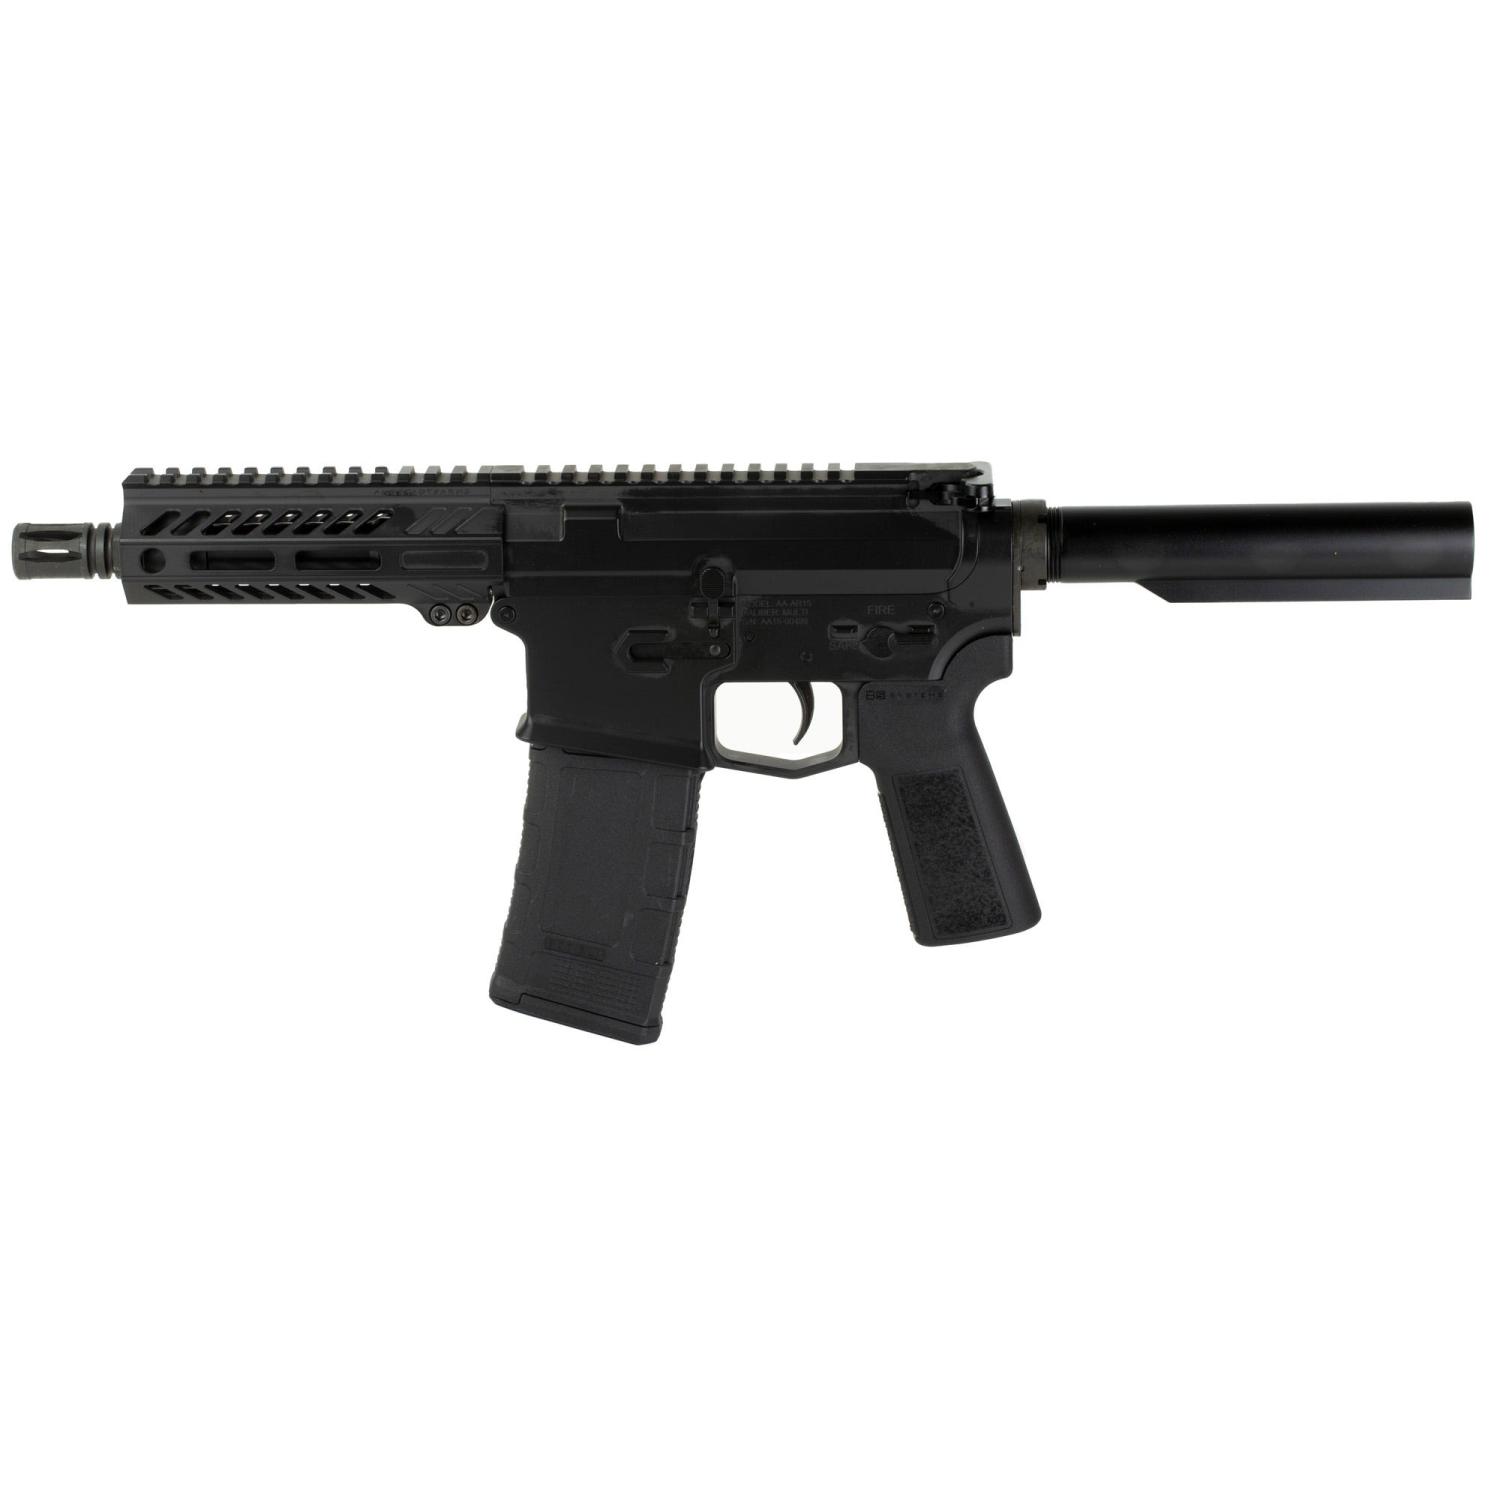 Angstadt Arms UDP-300 Pistol .300 AAC Blackout 6" Barrel 30-Rounds - $1343.99 (Grab A Quote) ($9.99 S/H on Firearms)